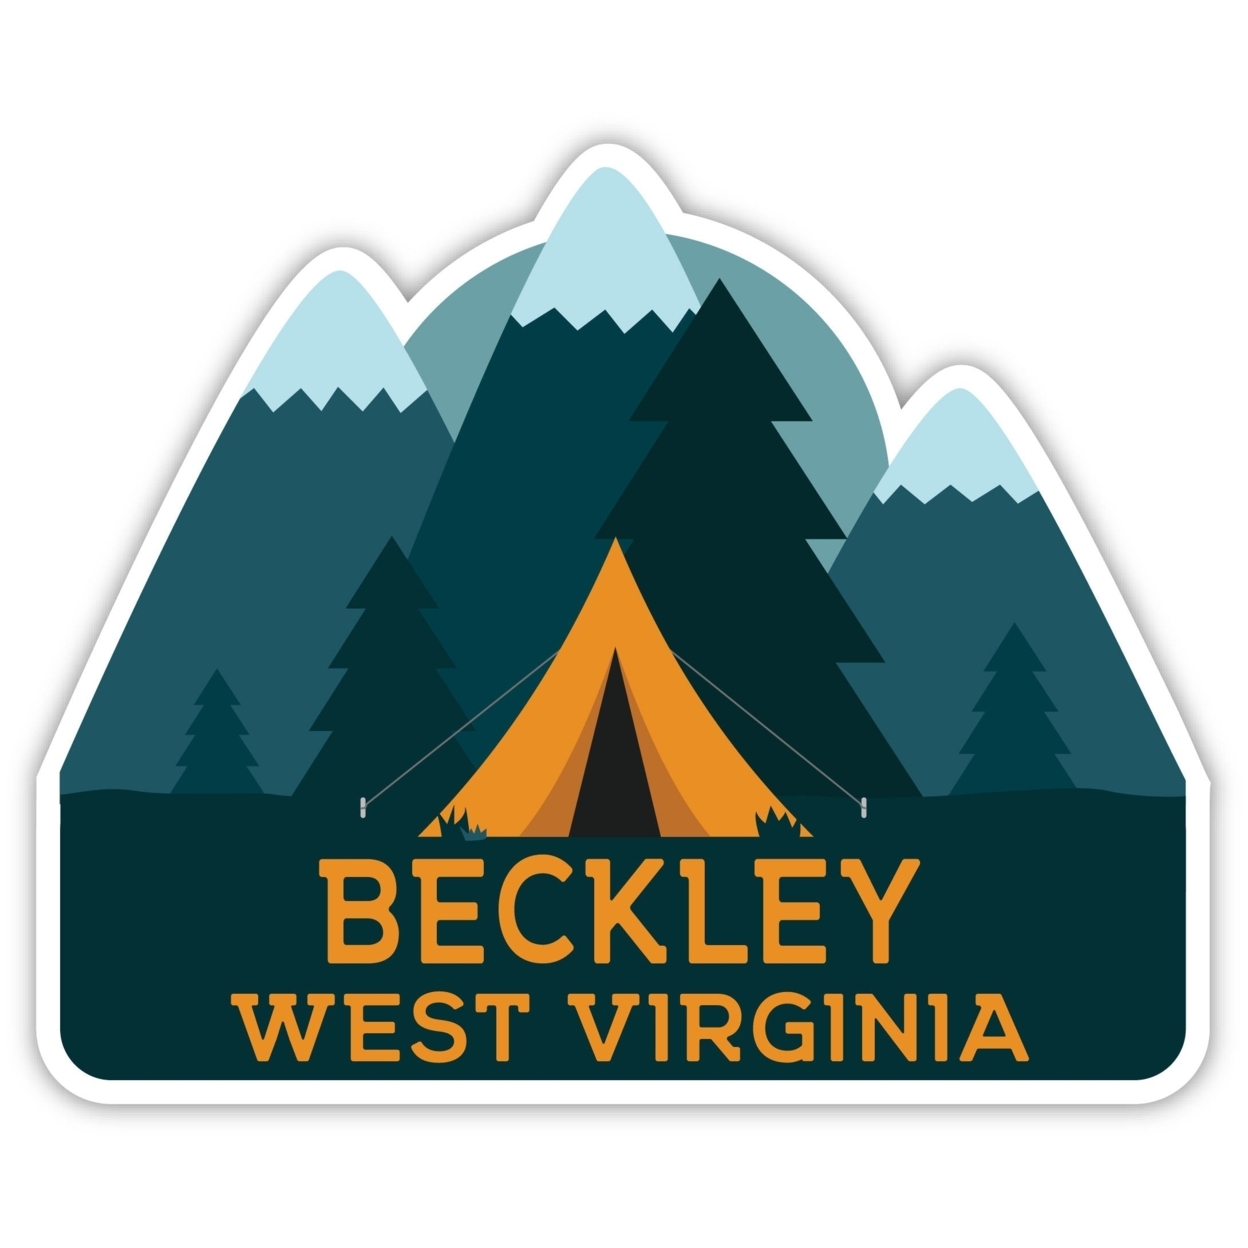 Beckley West Virginia Souvenir Decorative Stickers (Choose Theme And Size) - 4-Pack, 10-Inch, Bear